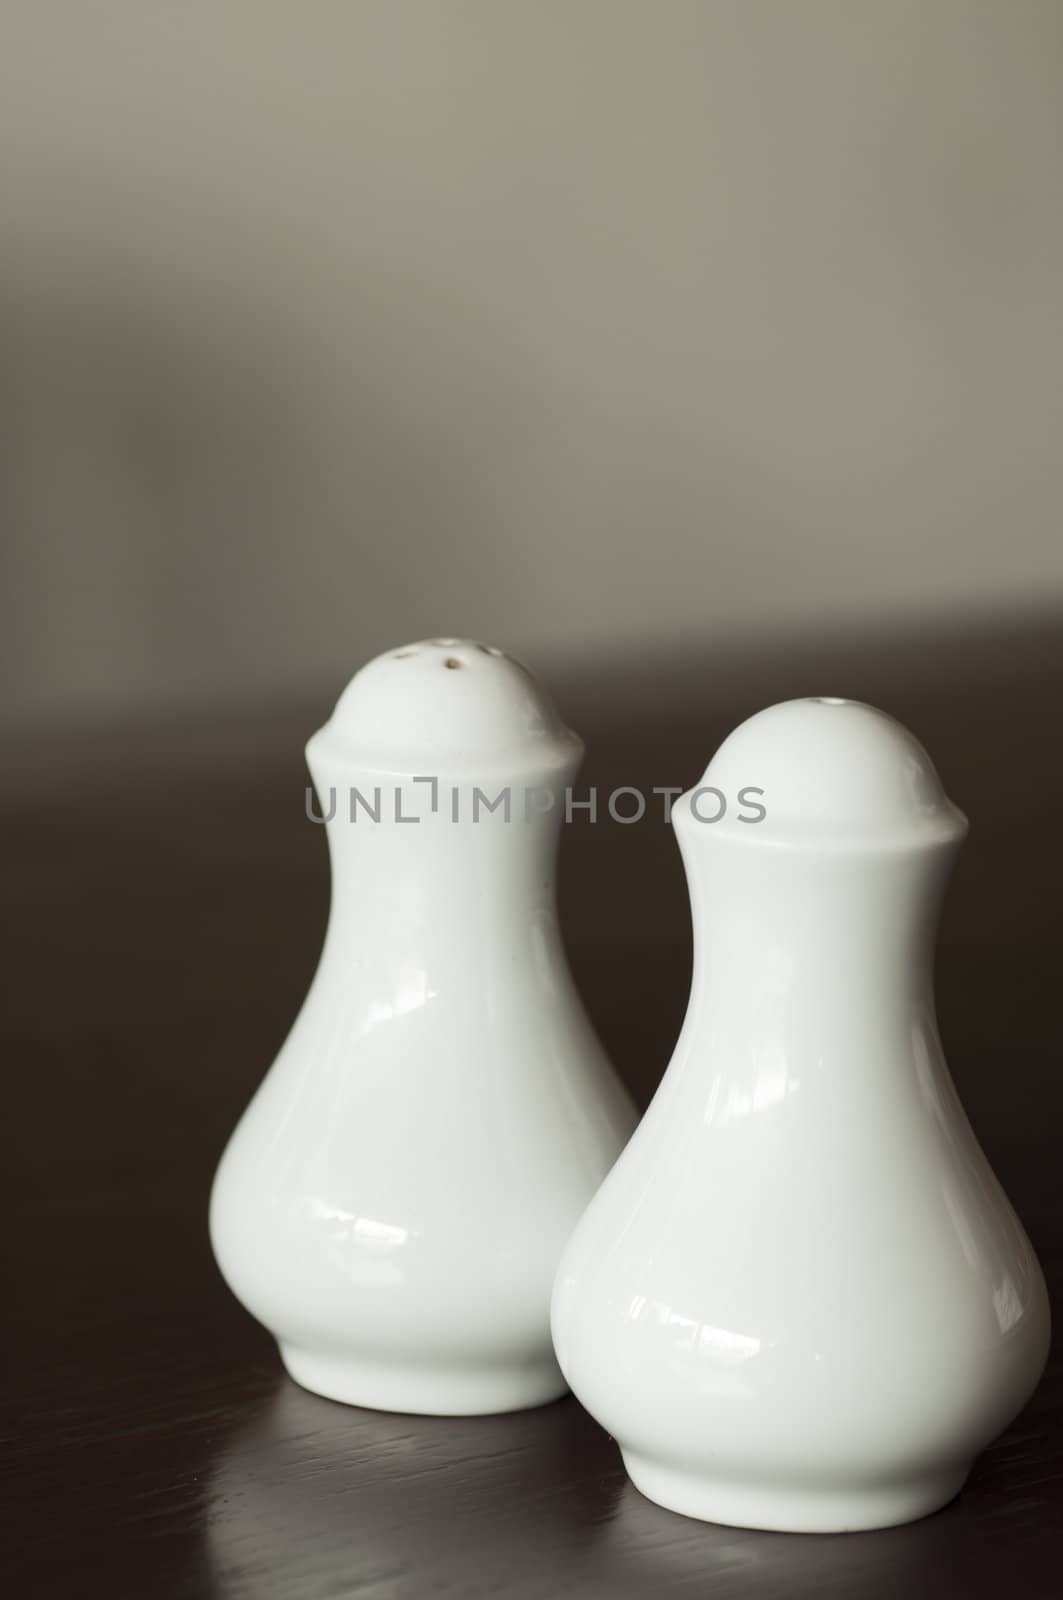 Porcelain salt and pepper shakers by TanawatPontchour